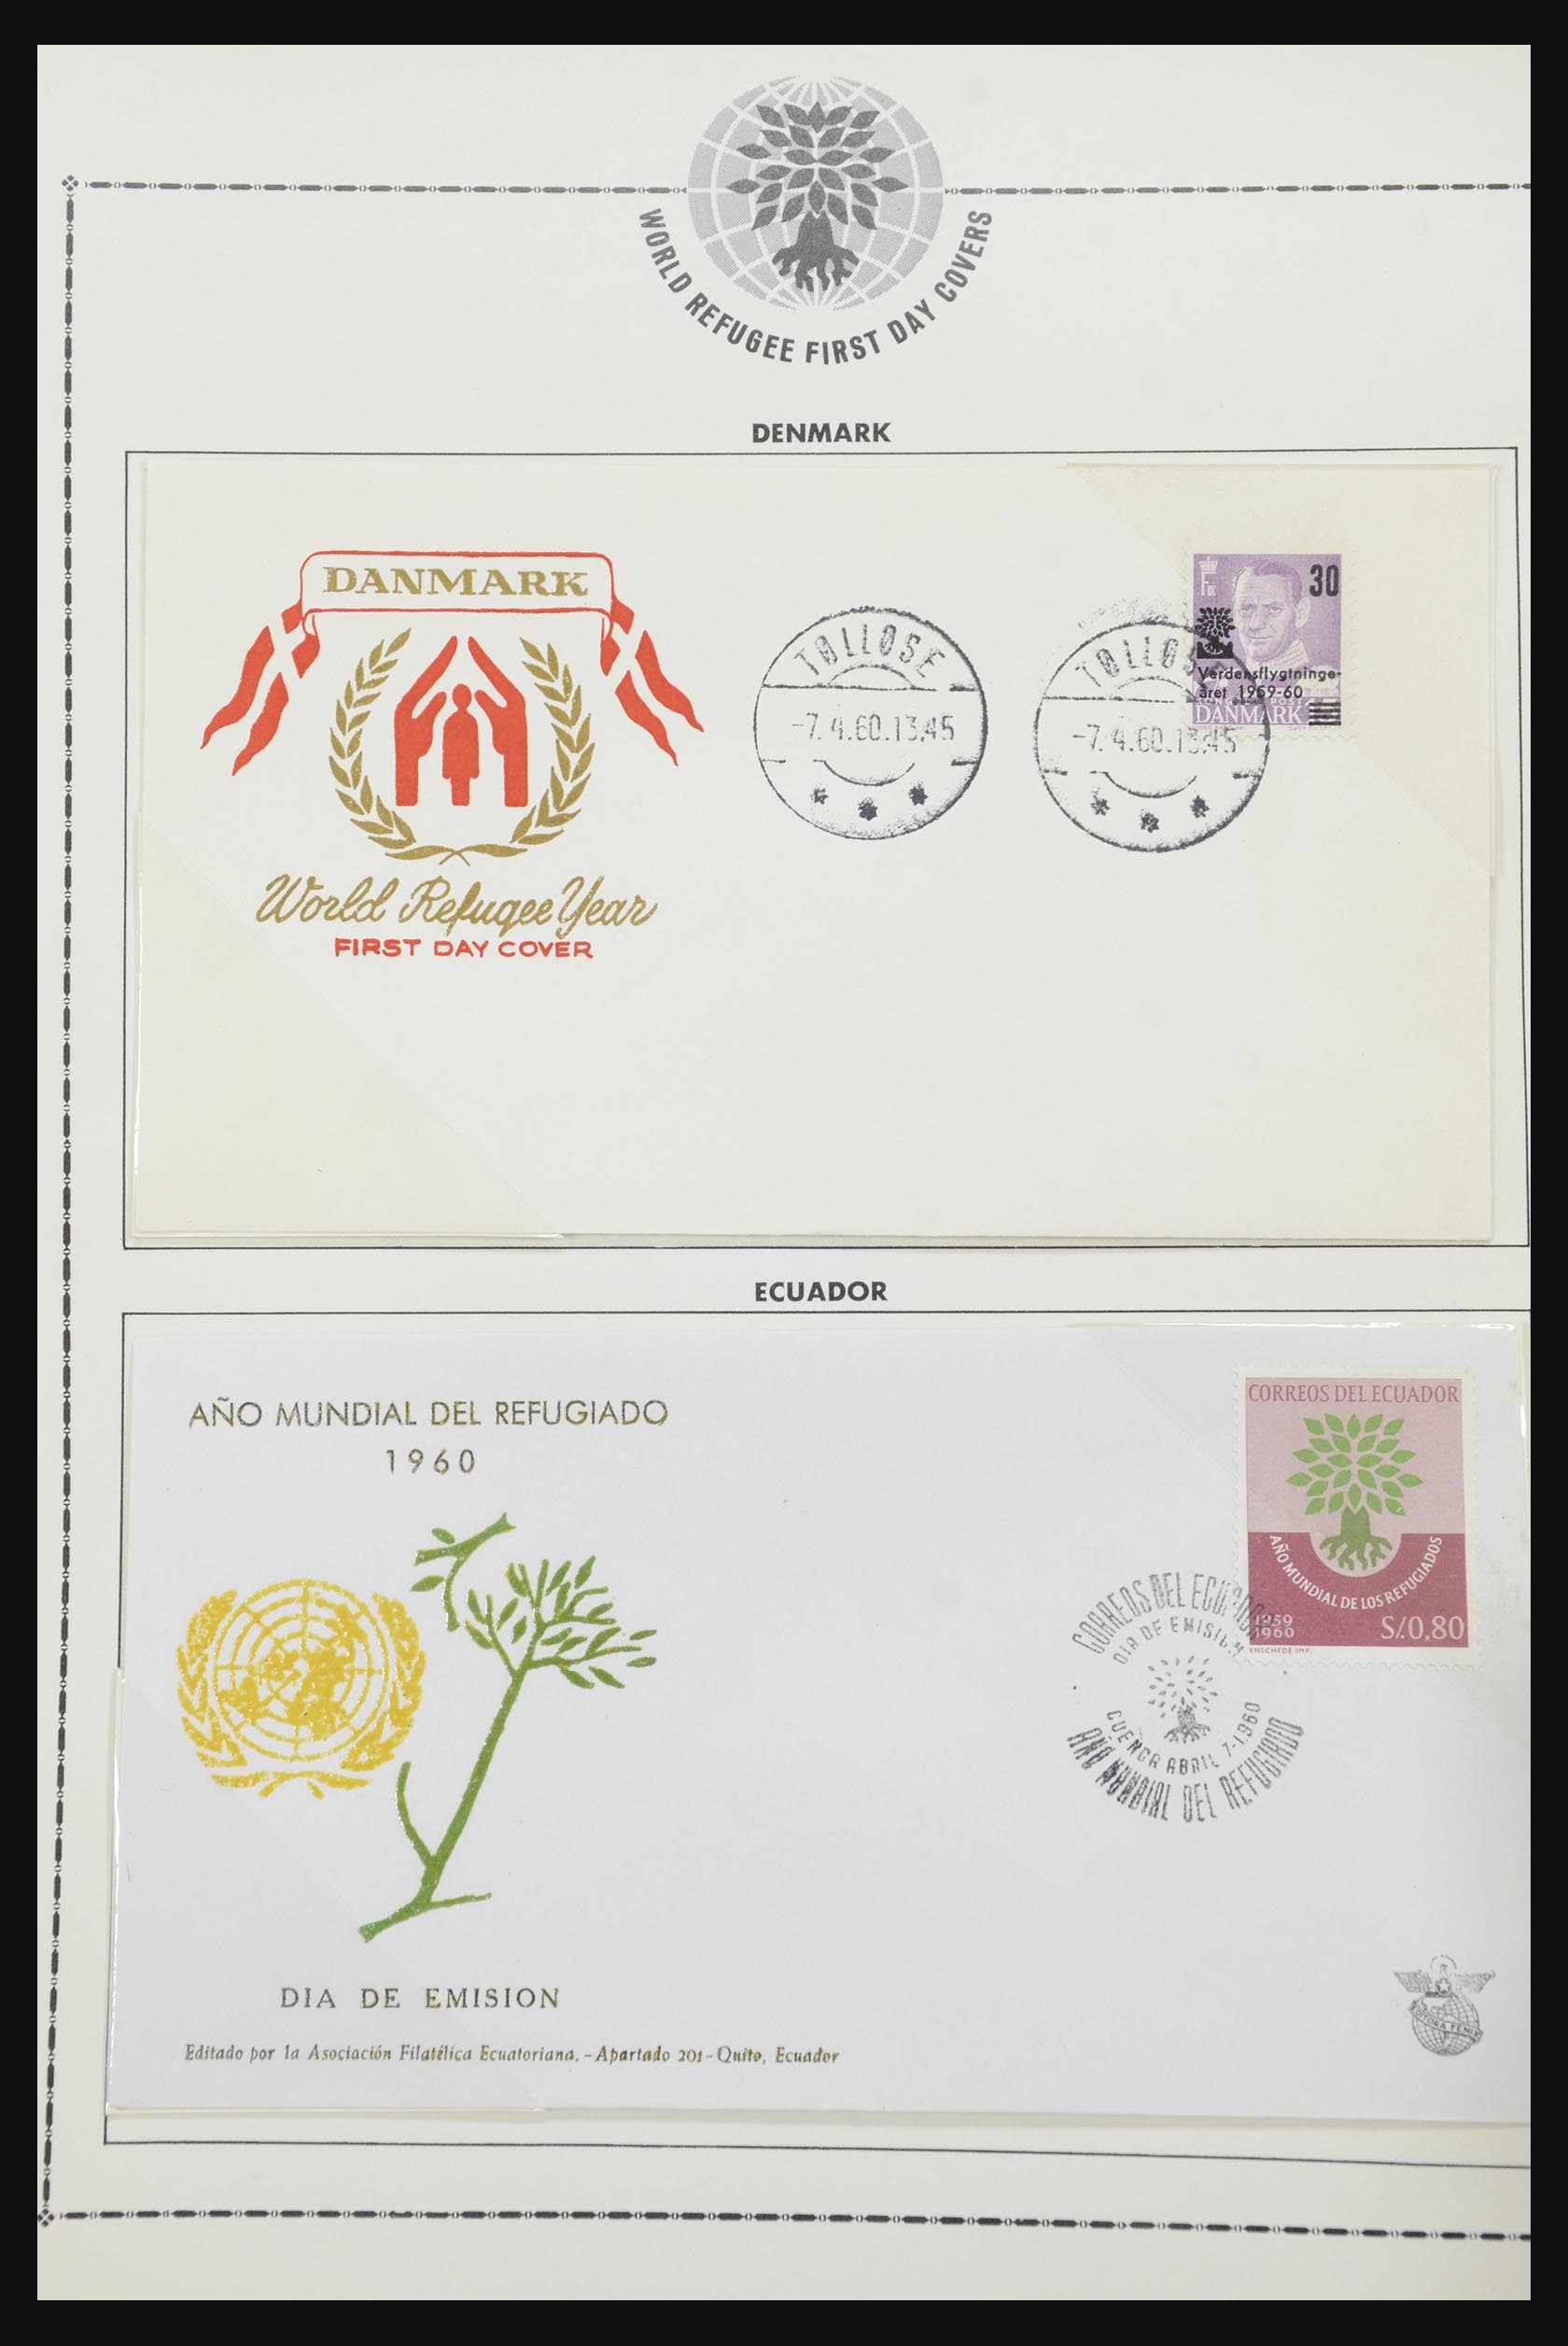 31921 040 - 31921 Thematics on cover 1934-1996.